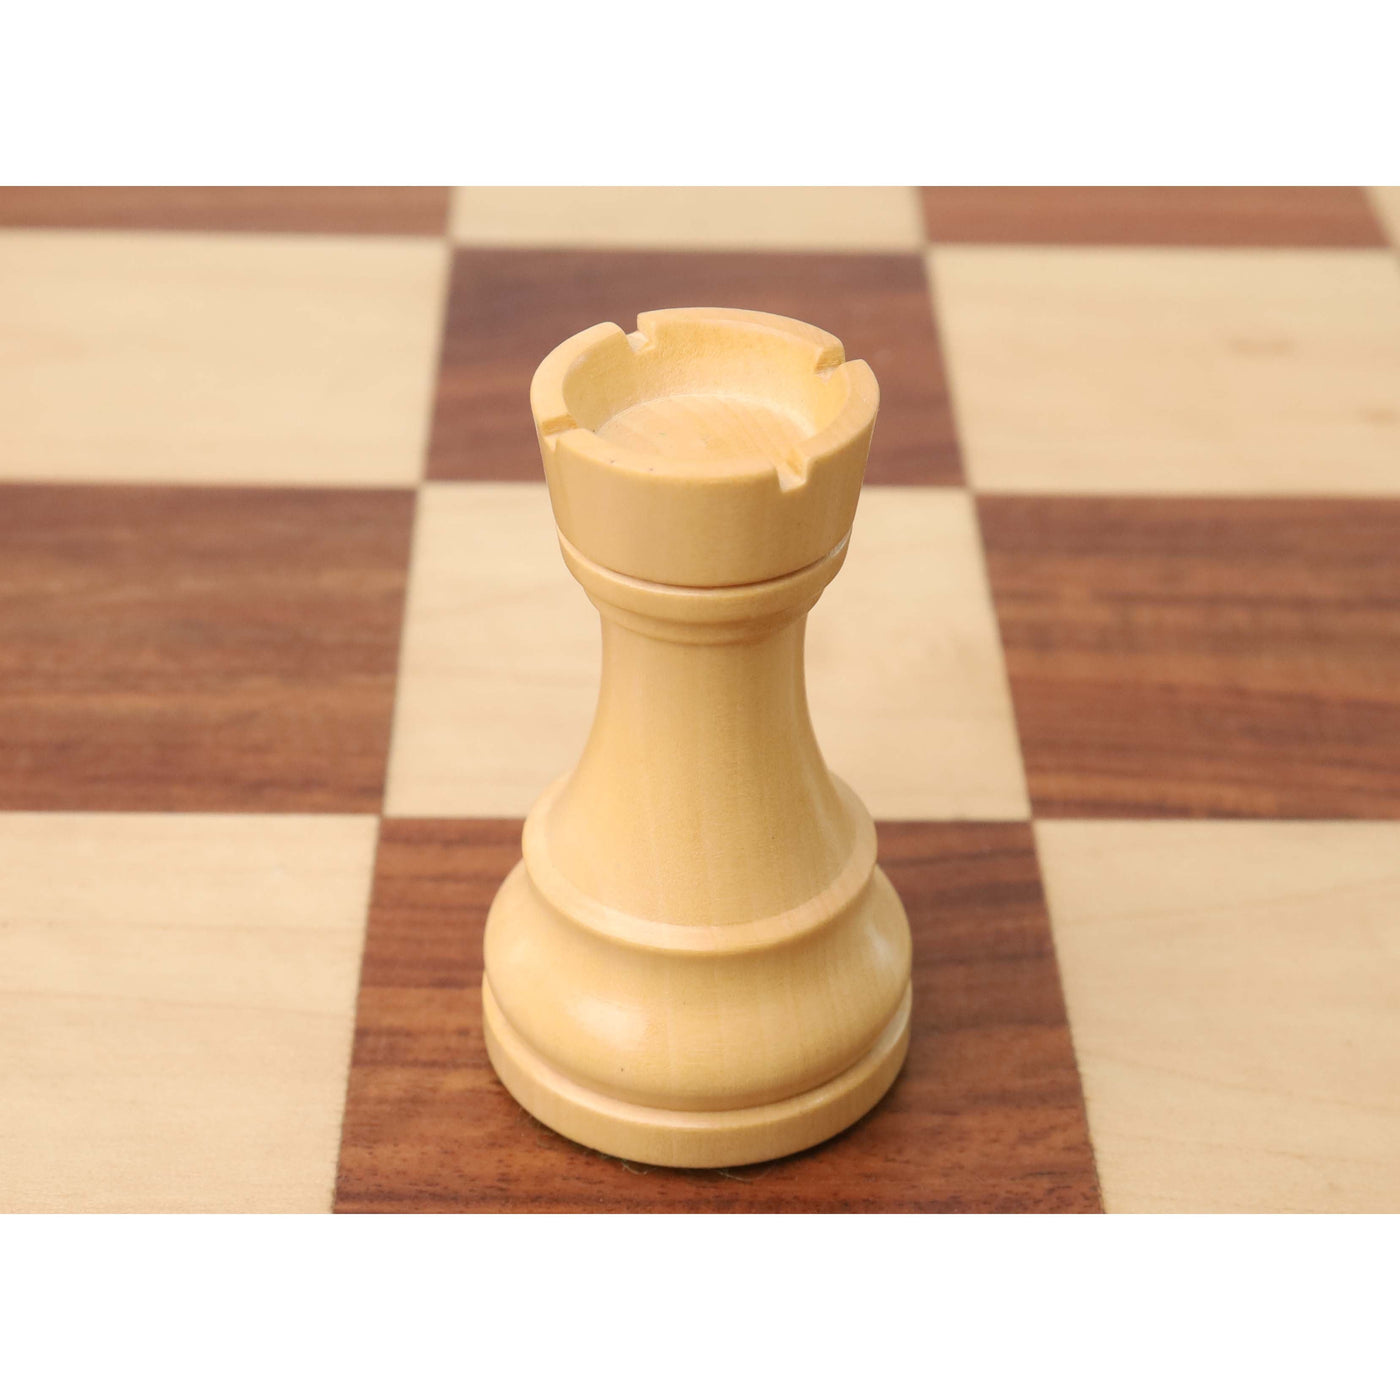 French Lardy Staunton Chess Set - Chess Pieces Only - Weighted Golden Rose wood  - 4 Queens